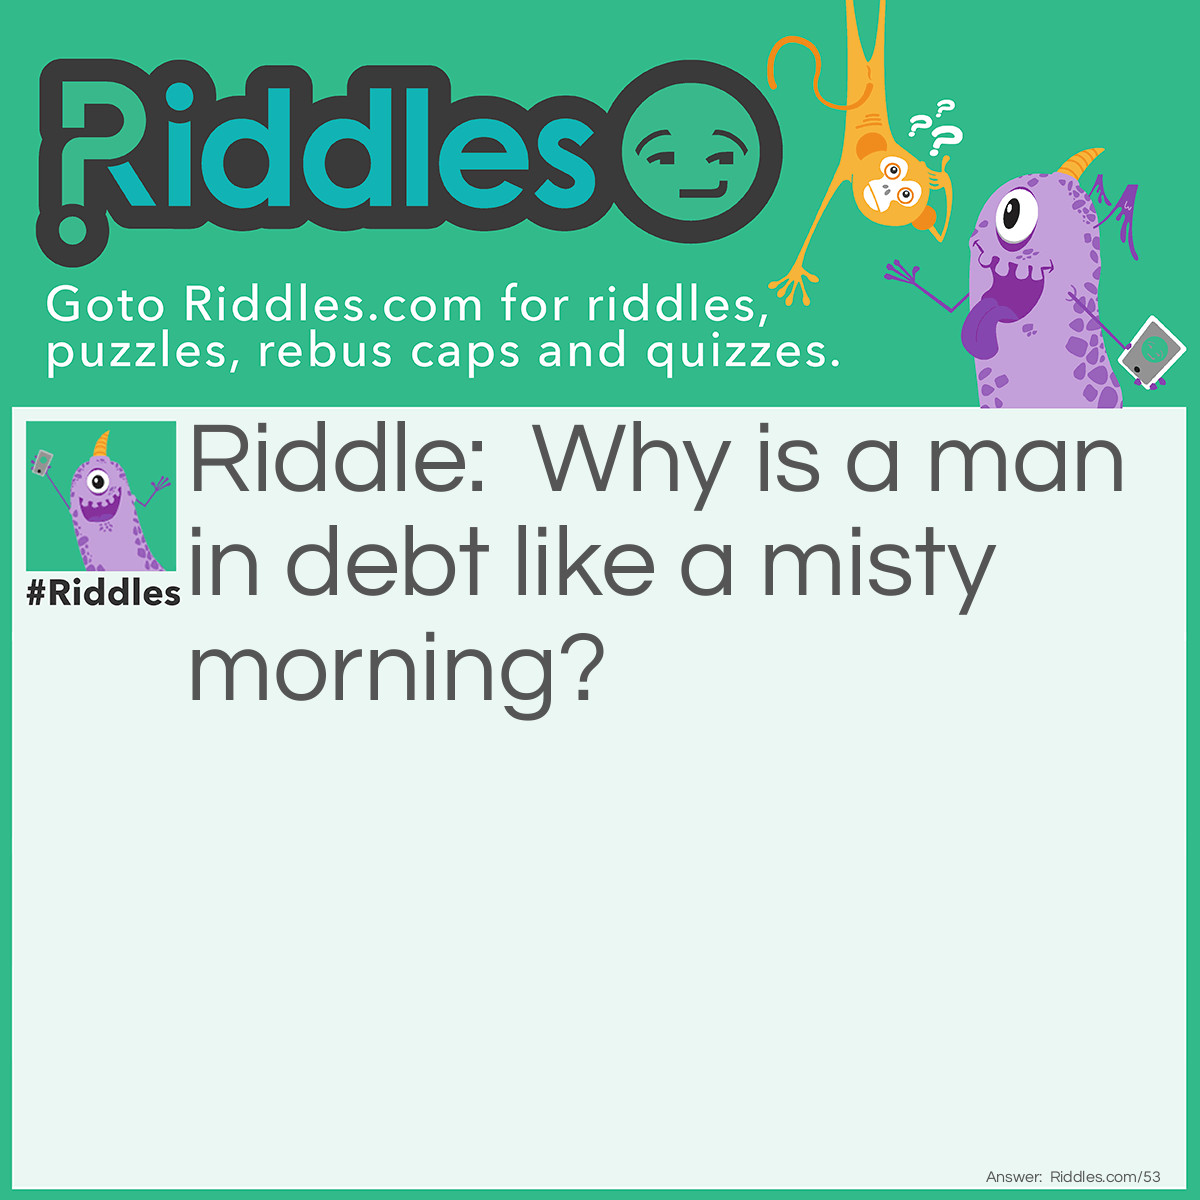 Riddle: Why is a man in debt like a misty morning? Answer: Because he is surrounded with dues (dews).